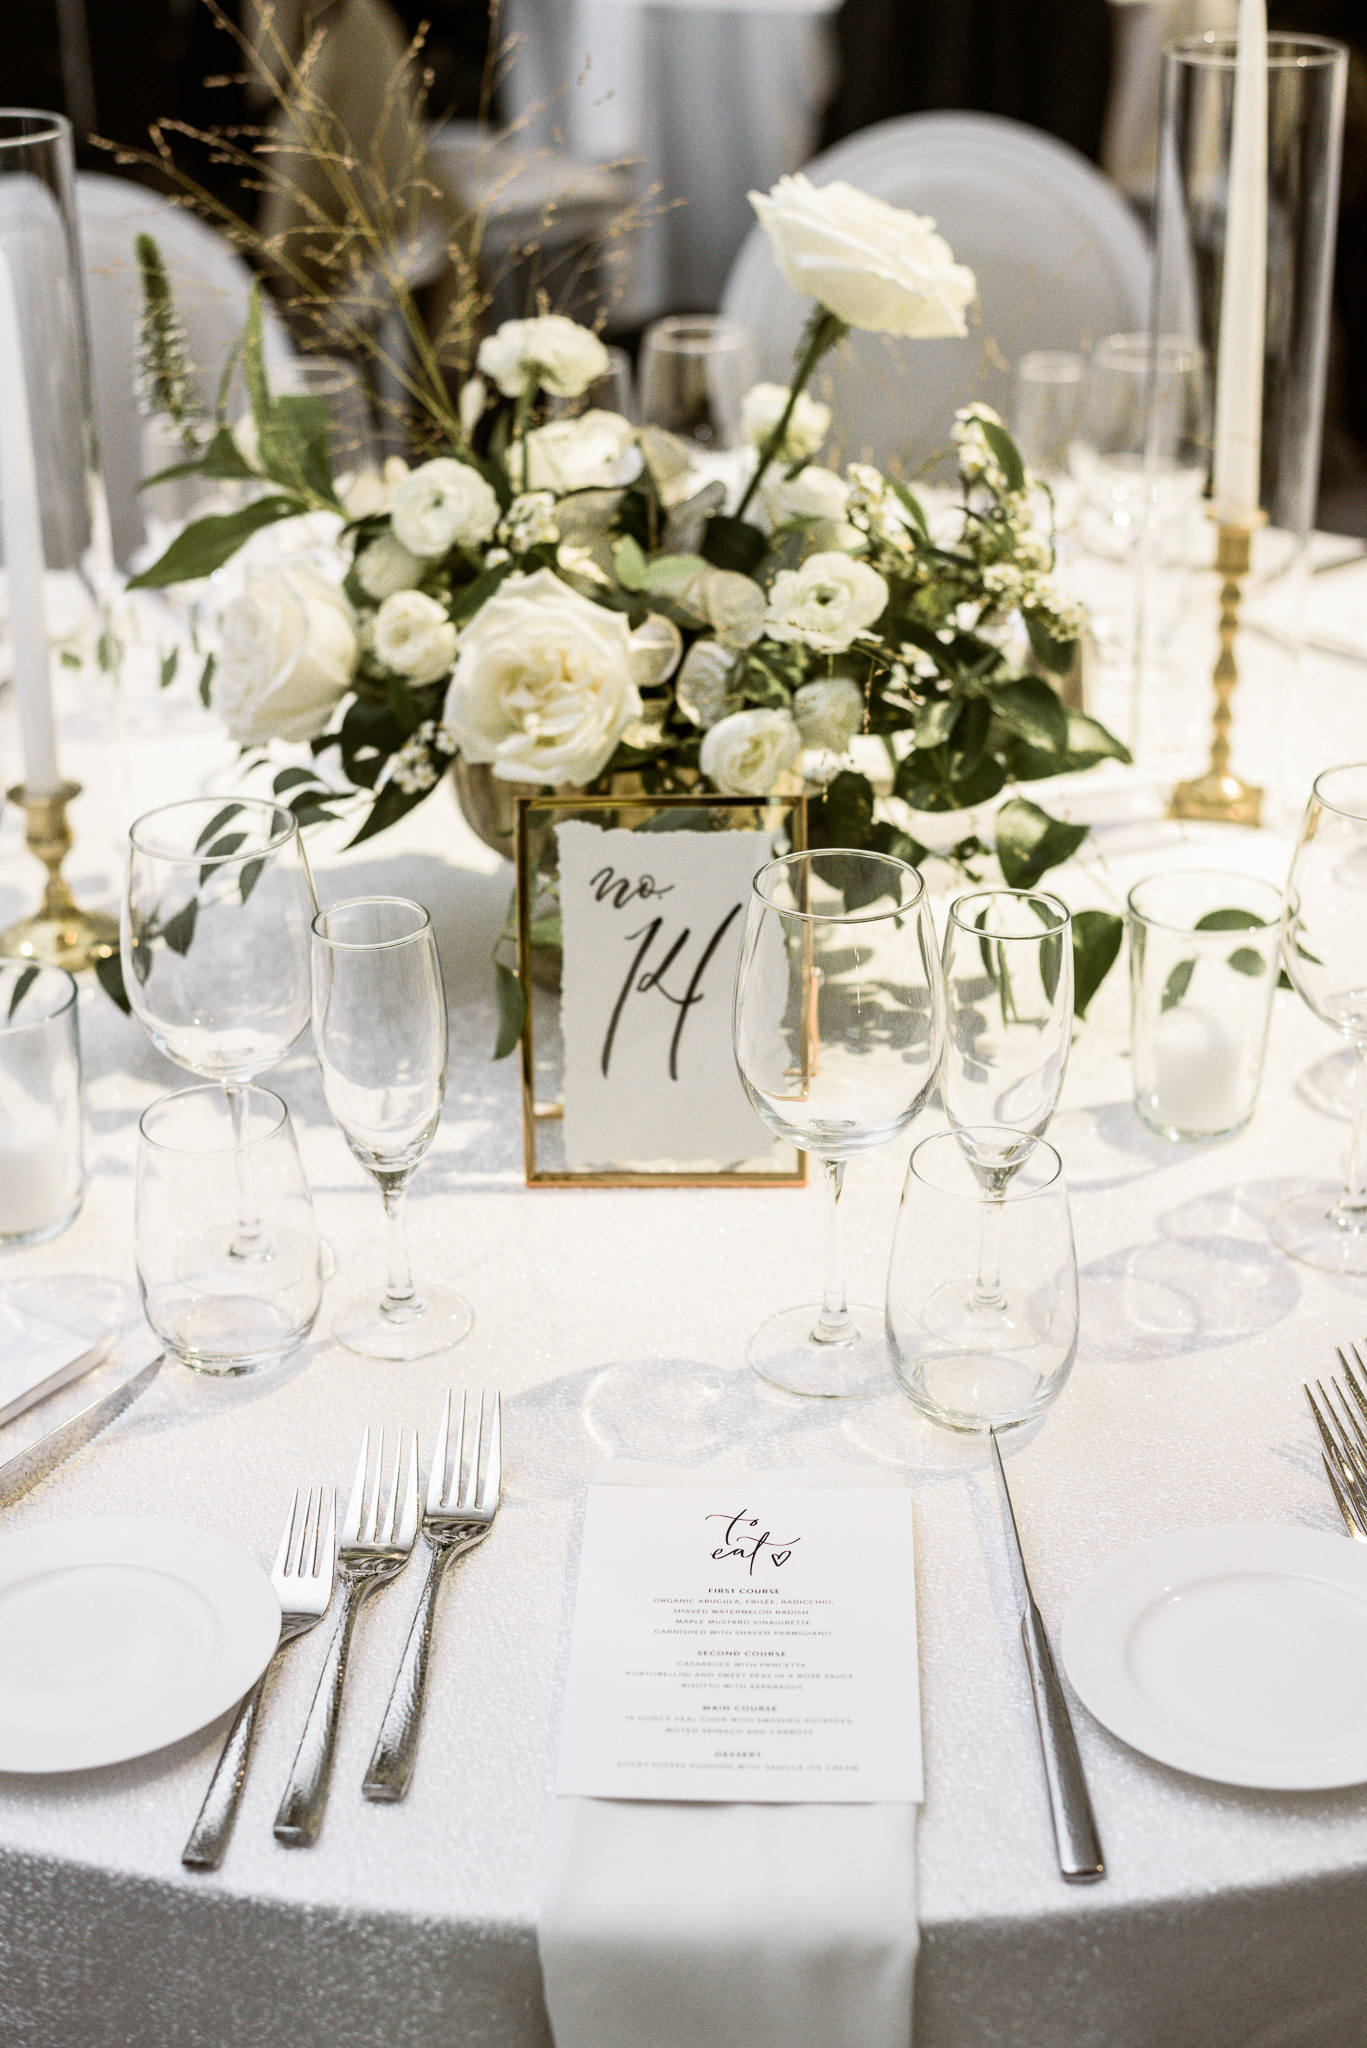 Gold, white and green at this Chateau le Parc wedding